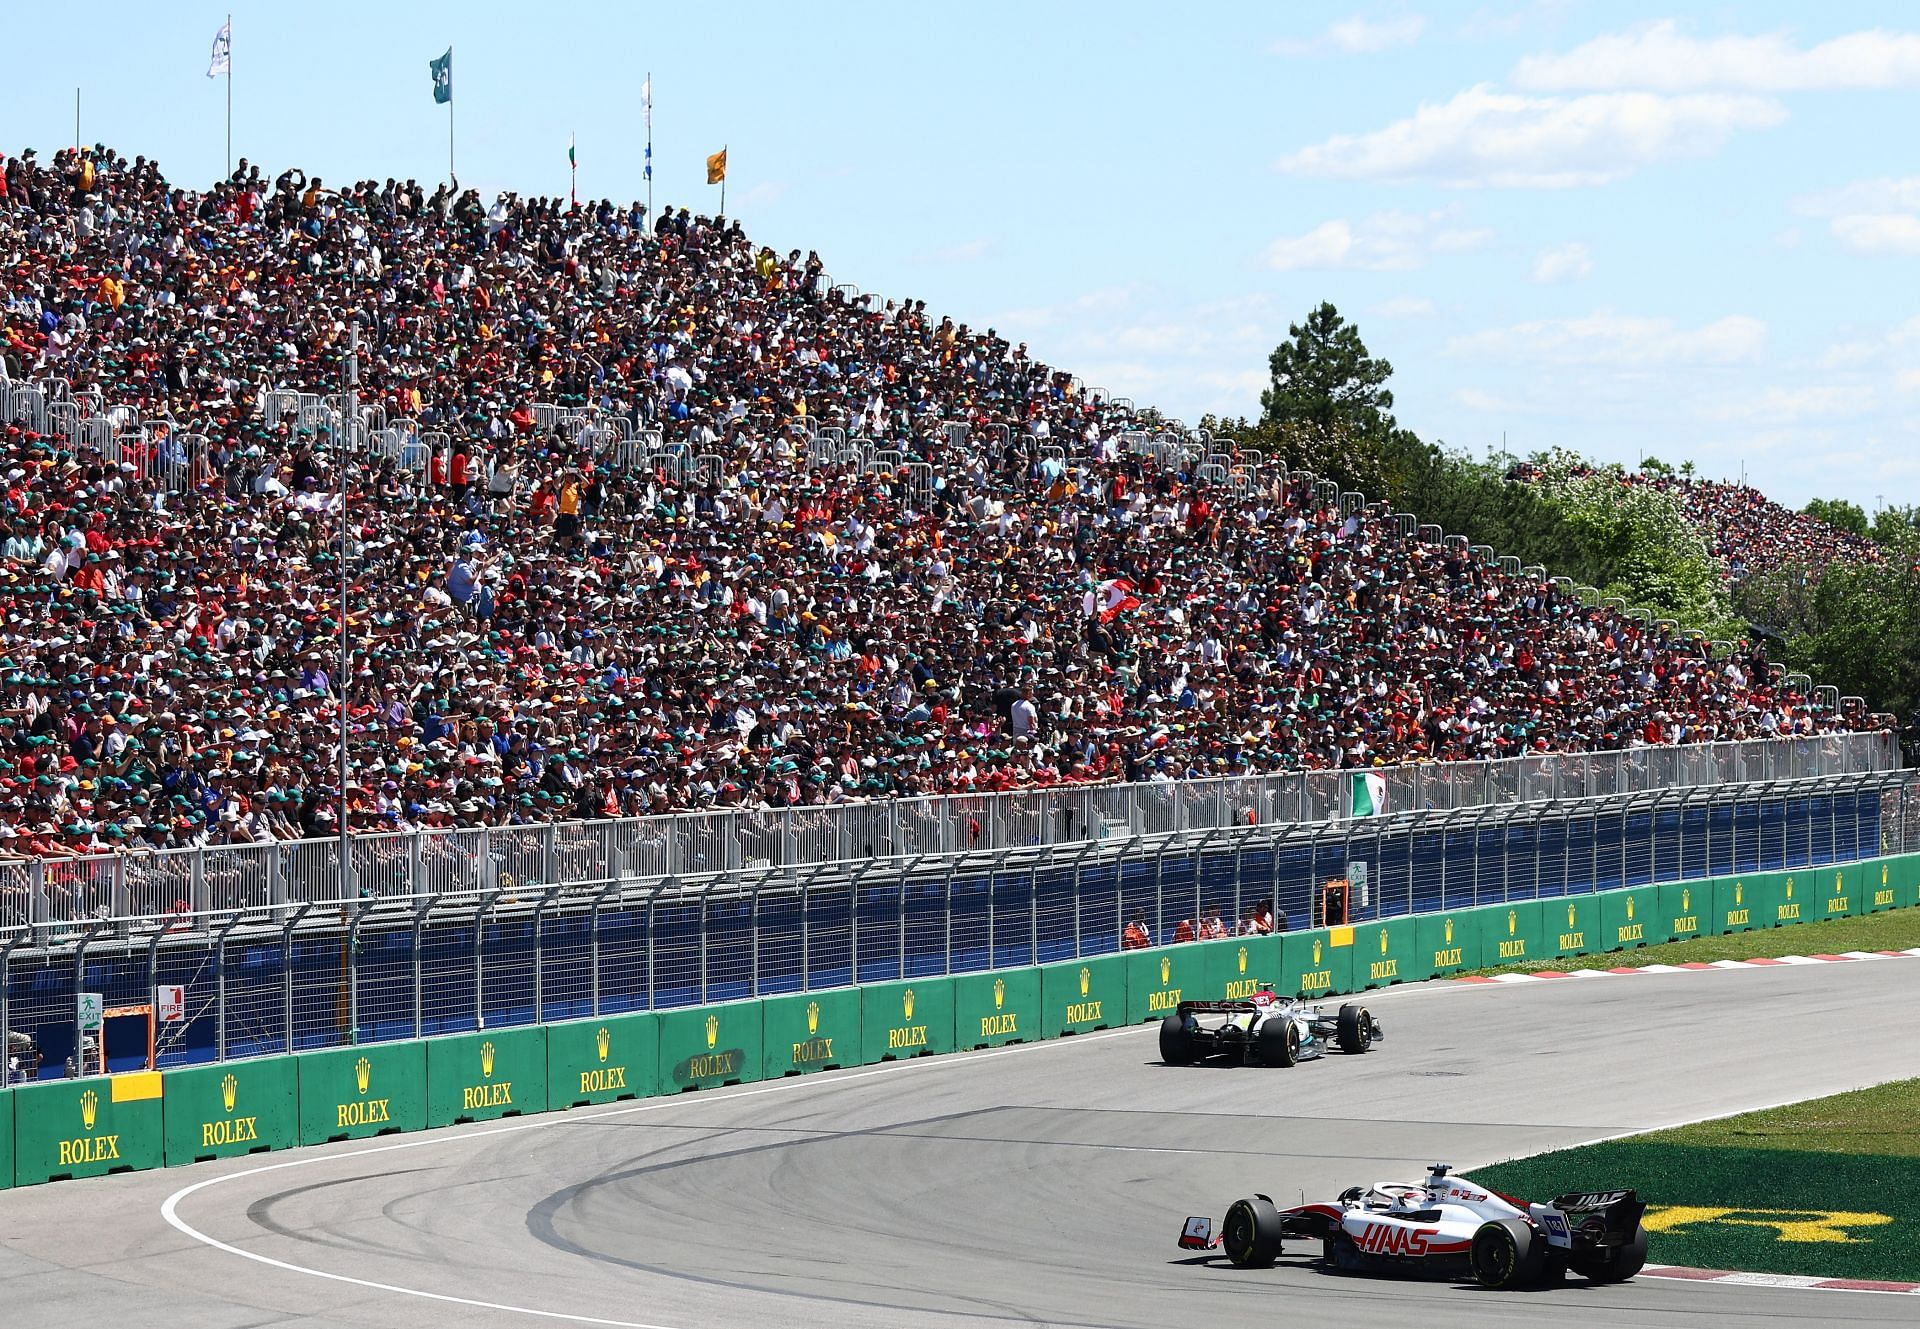 Lewis Hamilton and Kevin Magnussen in action during the 2022 F1 Canadian GP. (Photo by Clive Rose/Getty Images)